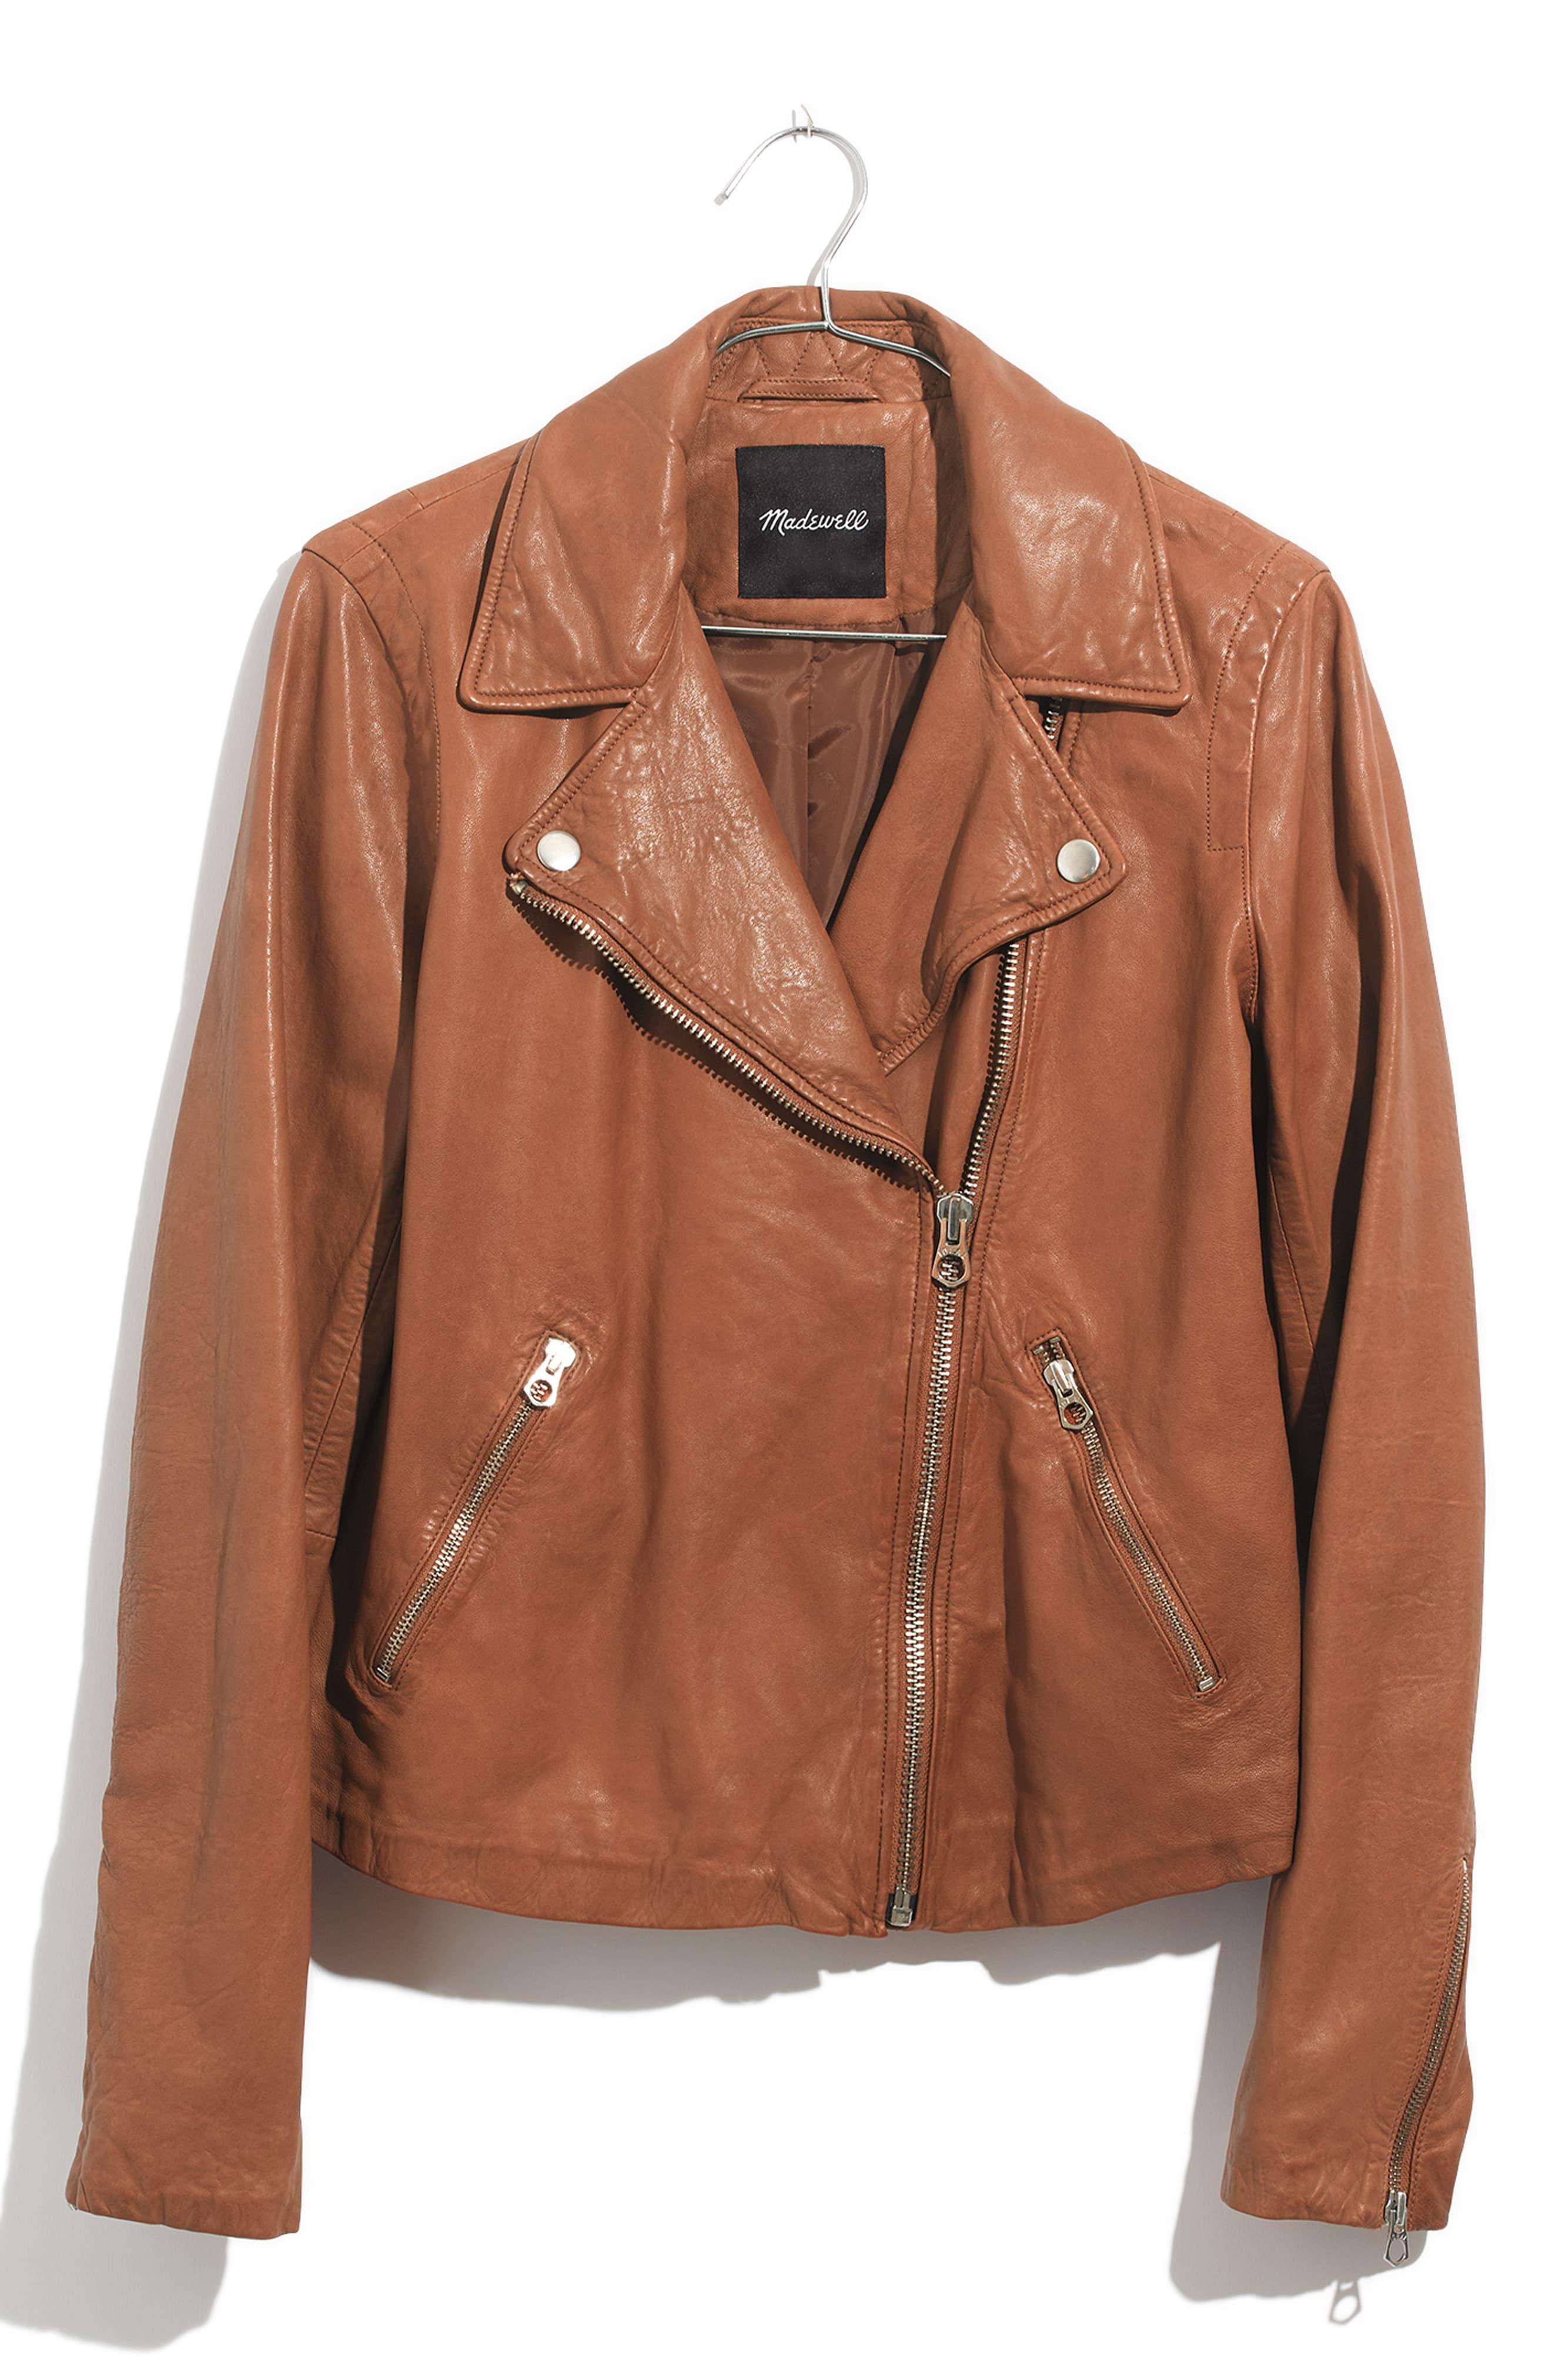 Madewell Washed Leather Motorcycle Jacket in Brown - Lyst